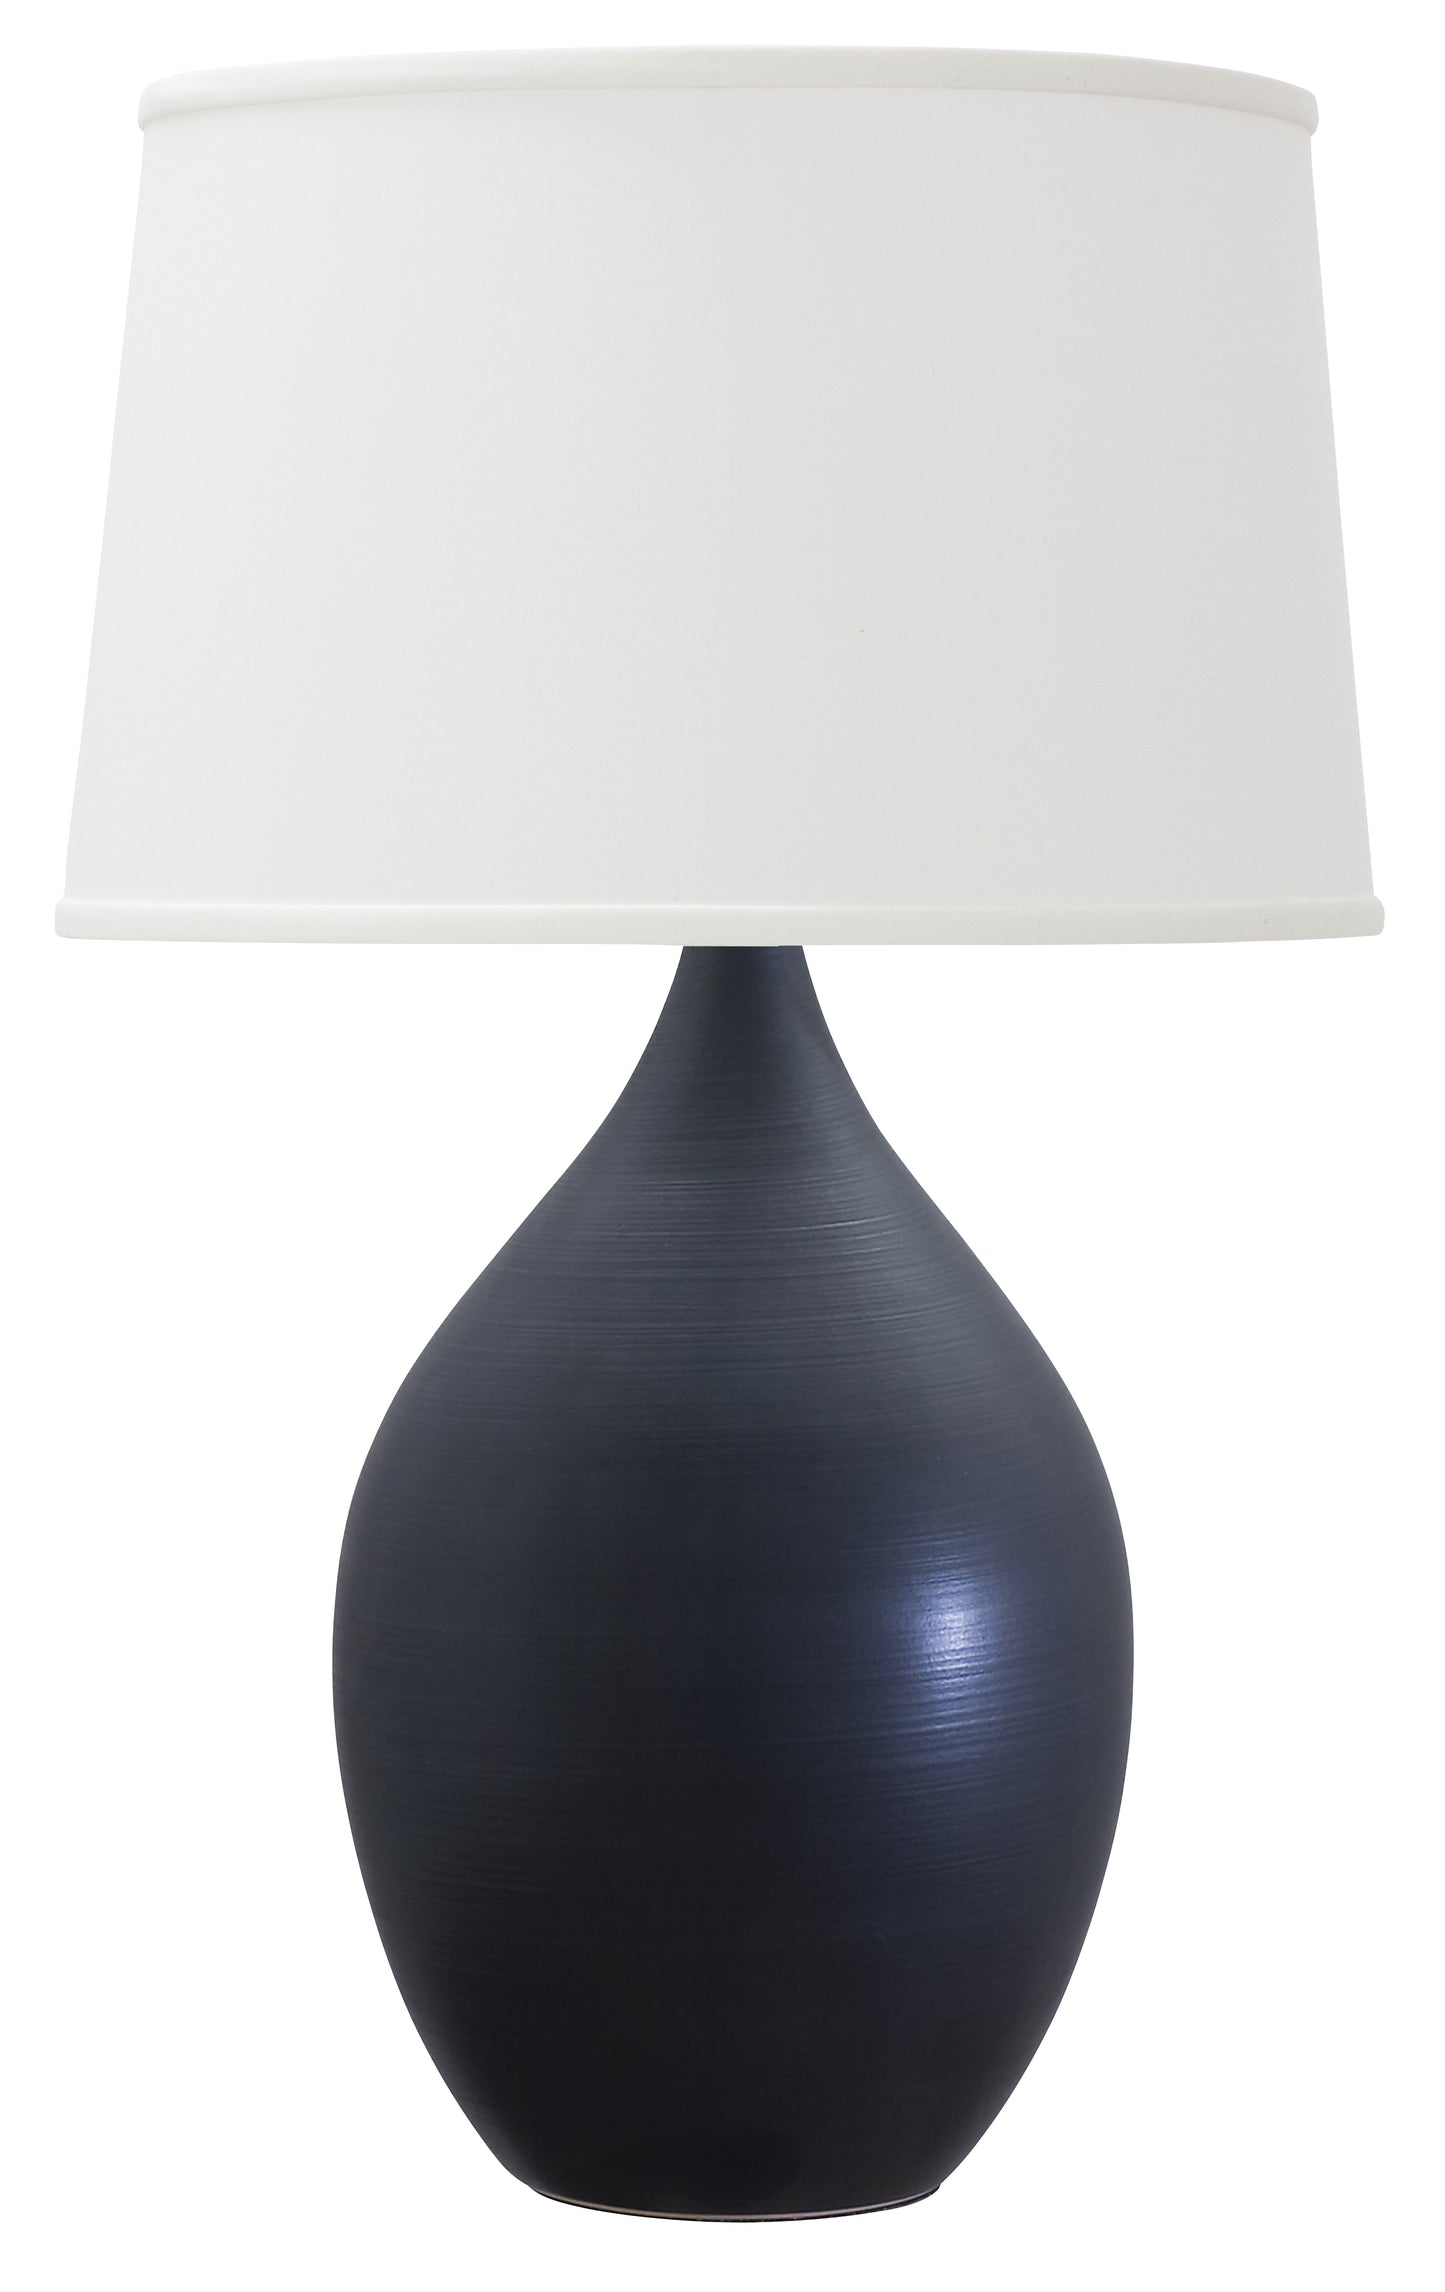 House of Troy Scatchard 21" Stoneware Table Lamp in Black Matte GS302-BM